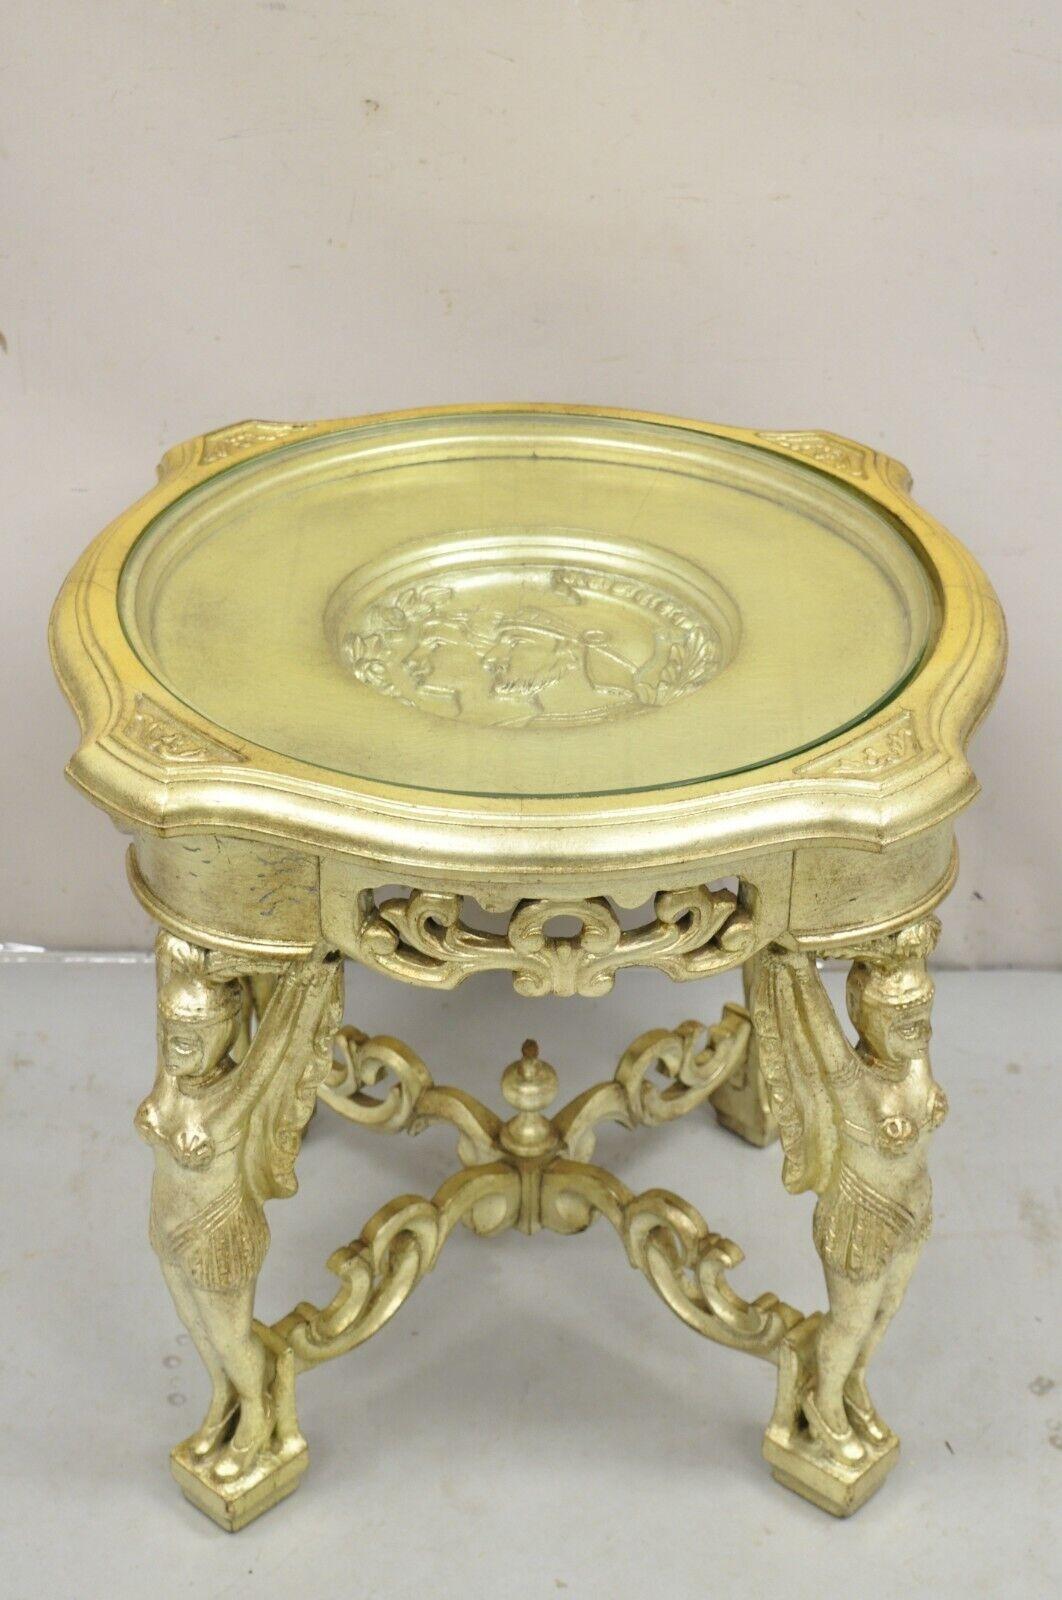 Vintage Art Deco Carved Female Dancer Silver Gold Round Coffee Side Table In Good Condition For Sale In Philadelphia, PA